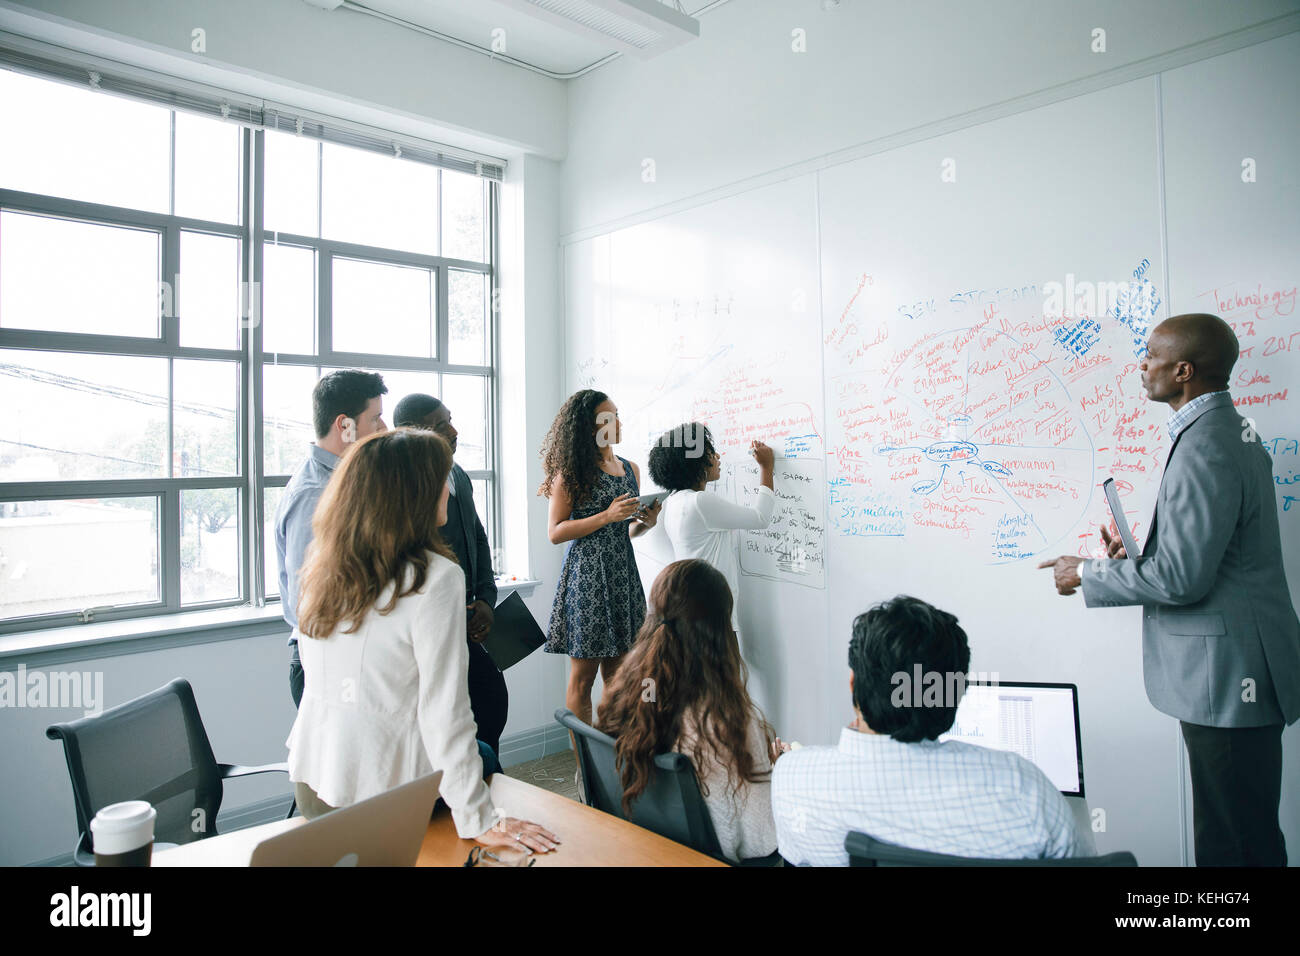 Businesswoman writing on whiteboard in meeting Stock Photo